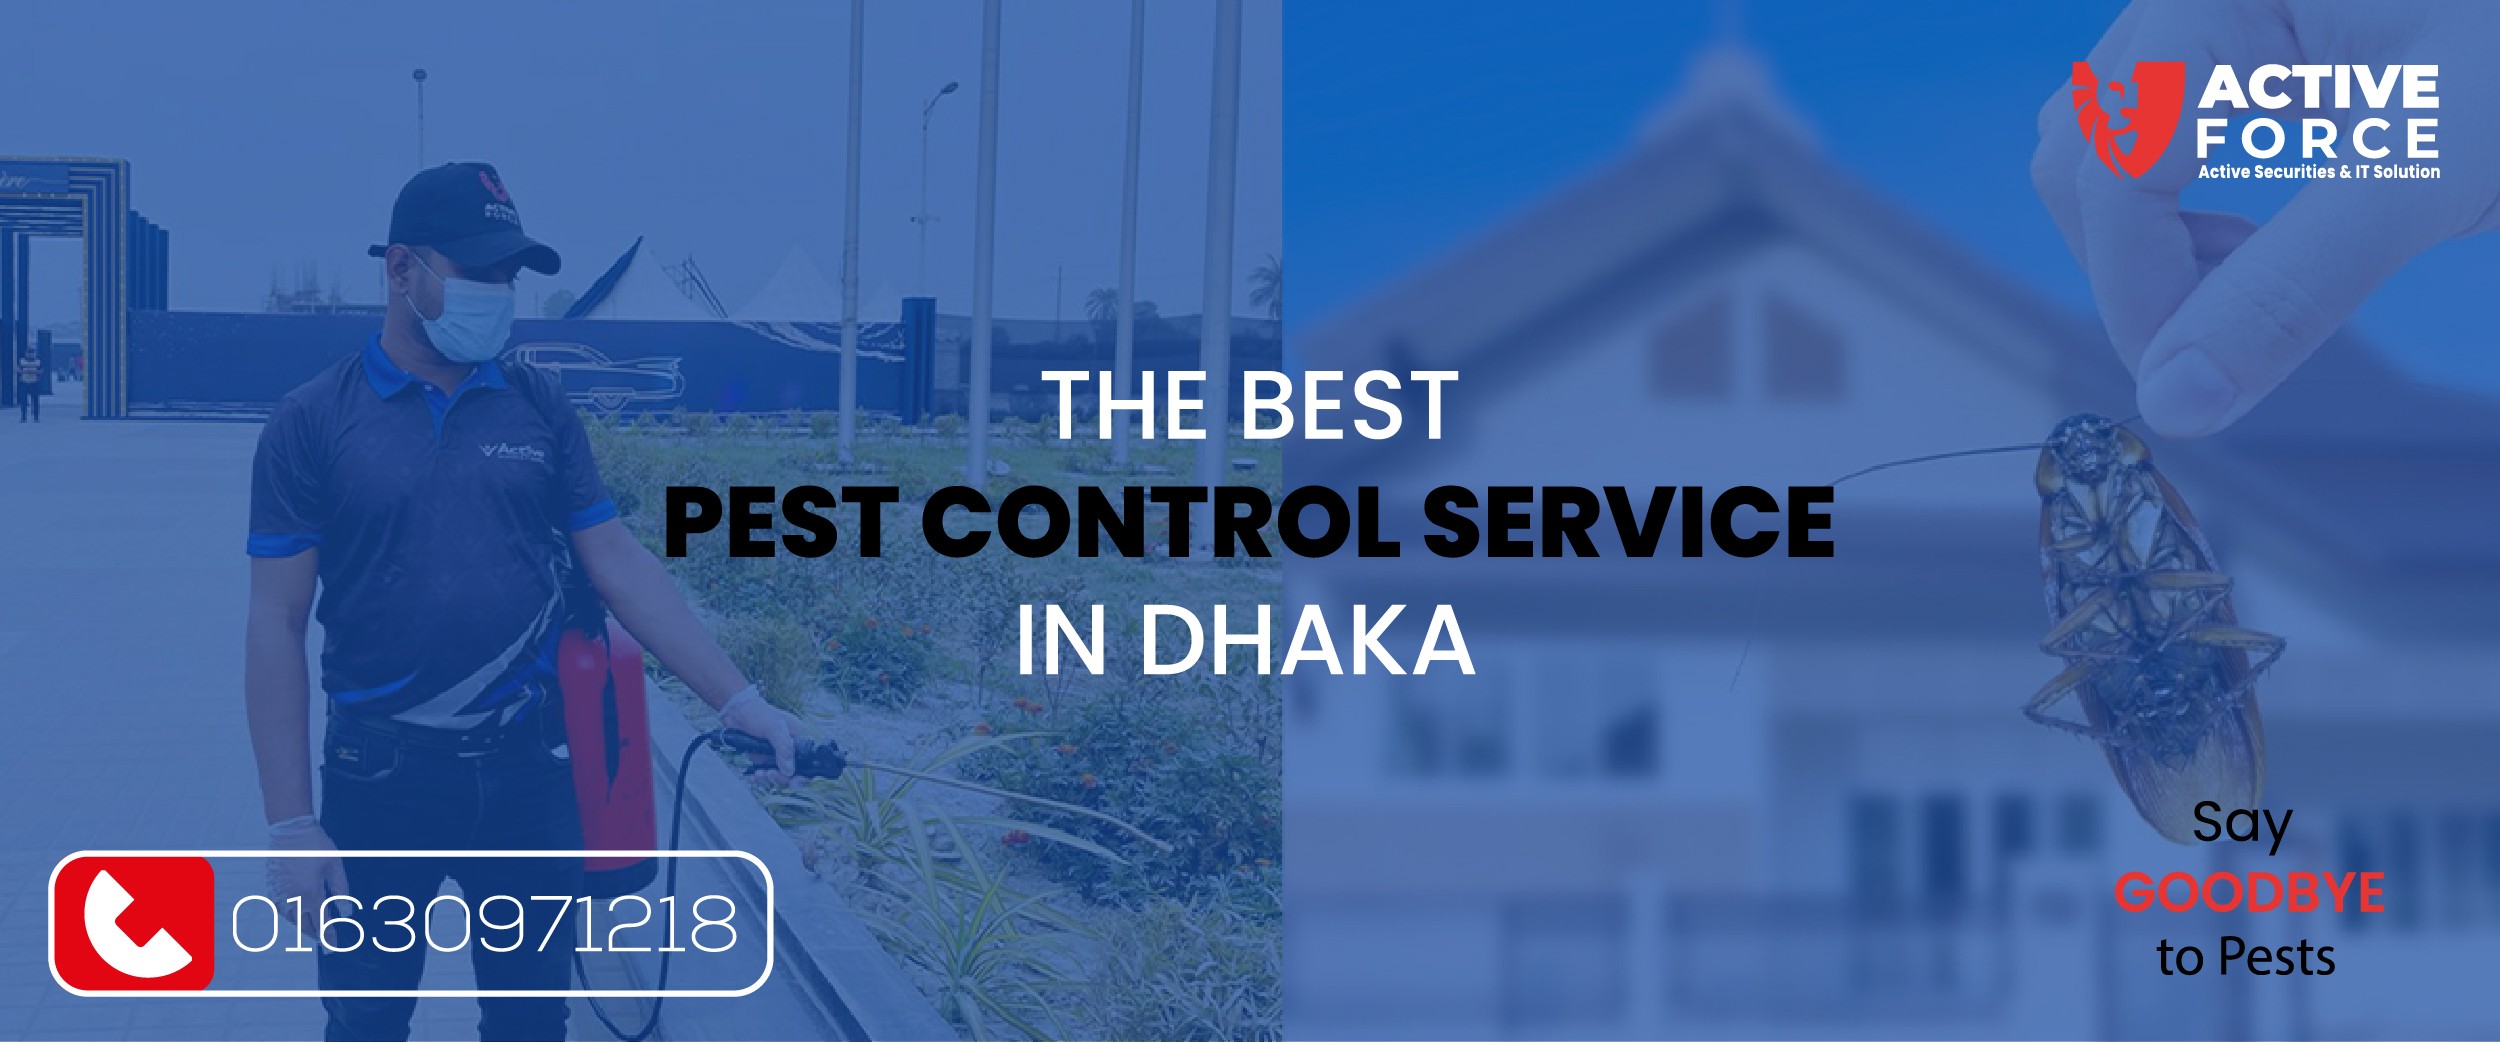 Say Goodbye to Pests with the Best Control Service in BD | Active Force